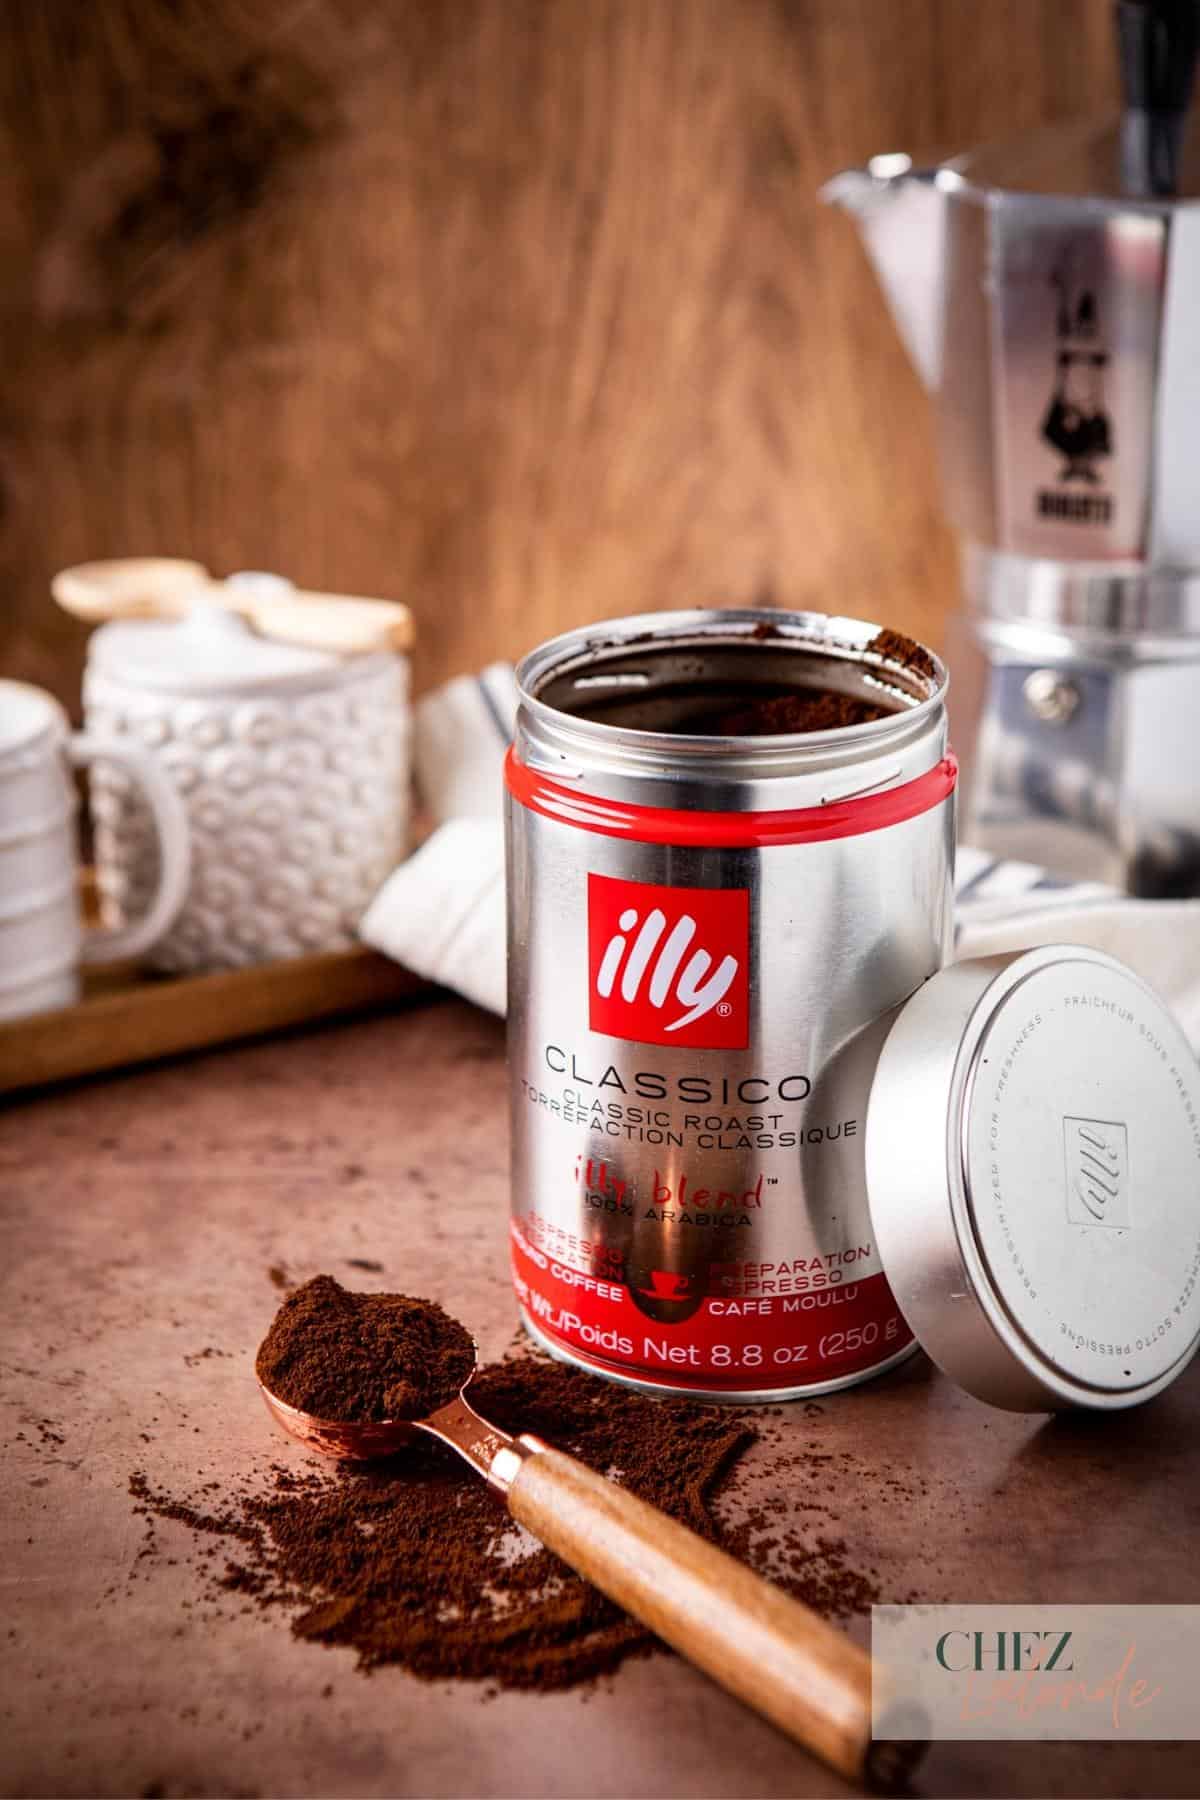 A can of Illy Coffee.